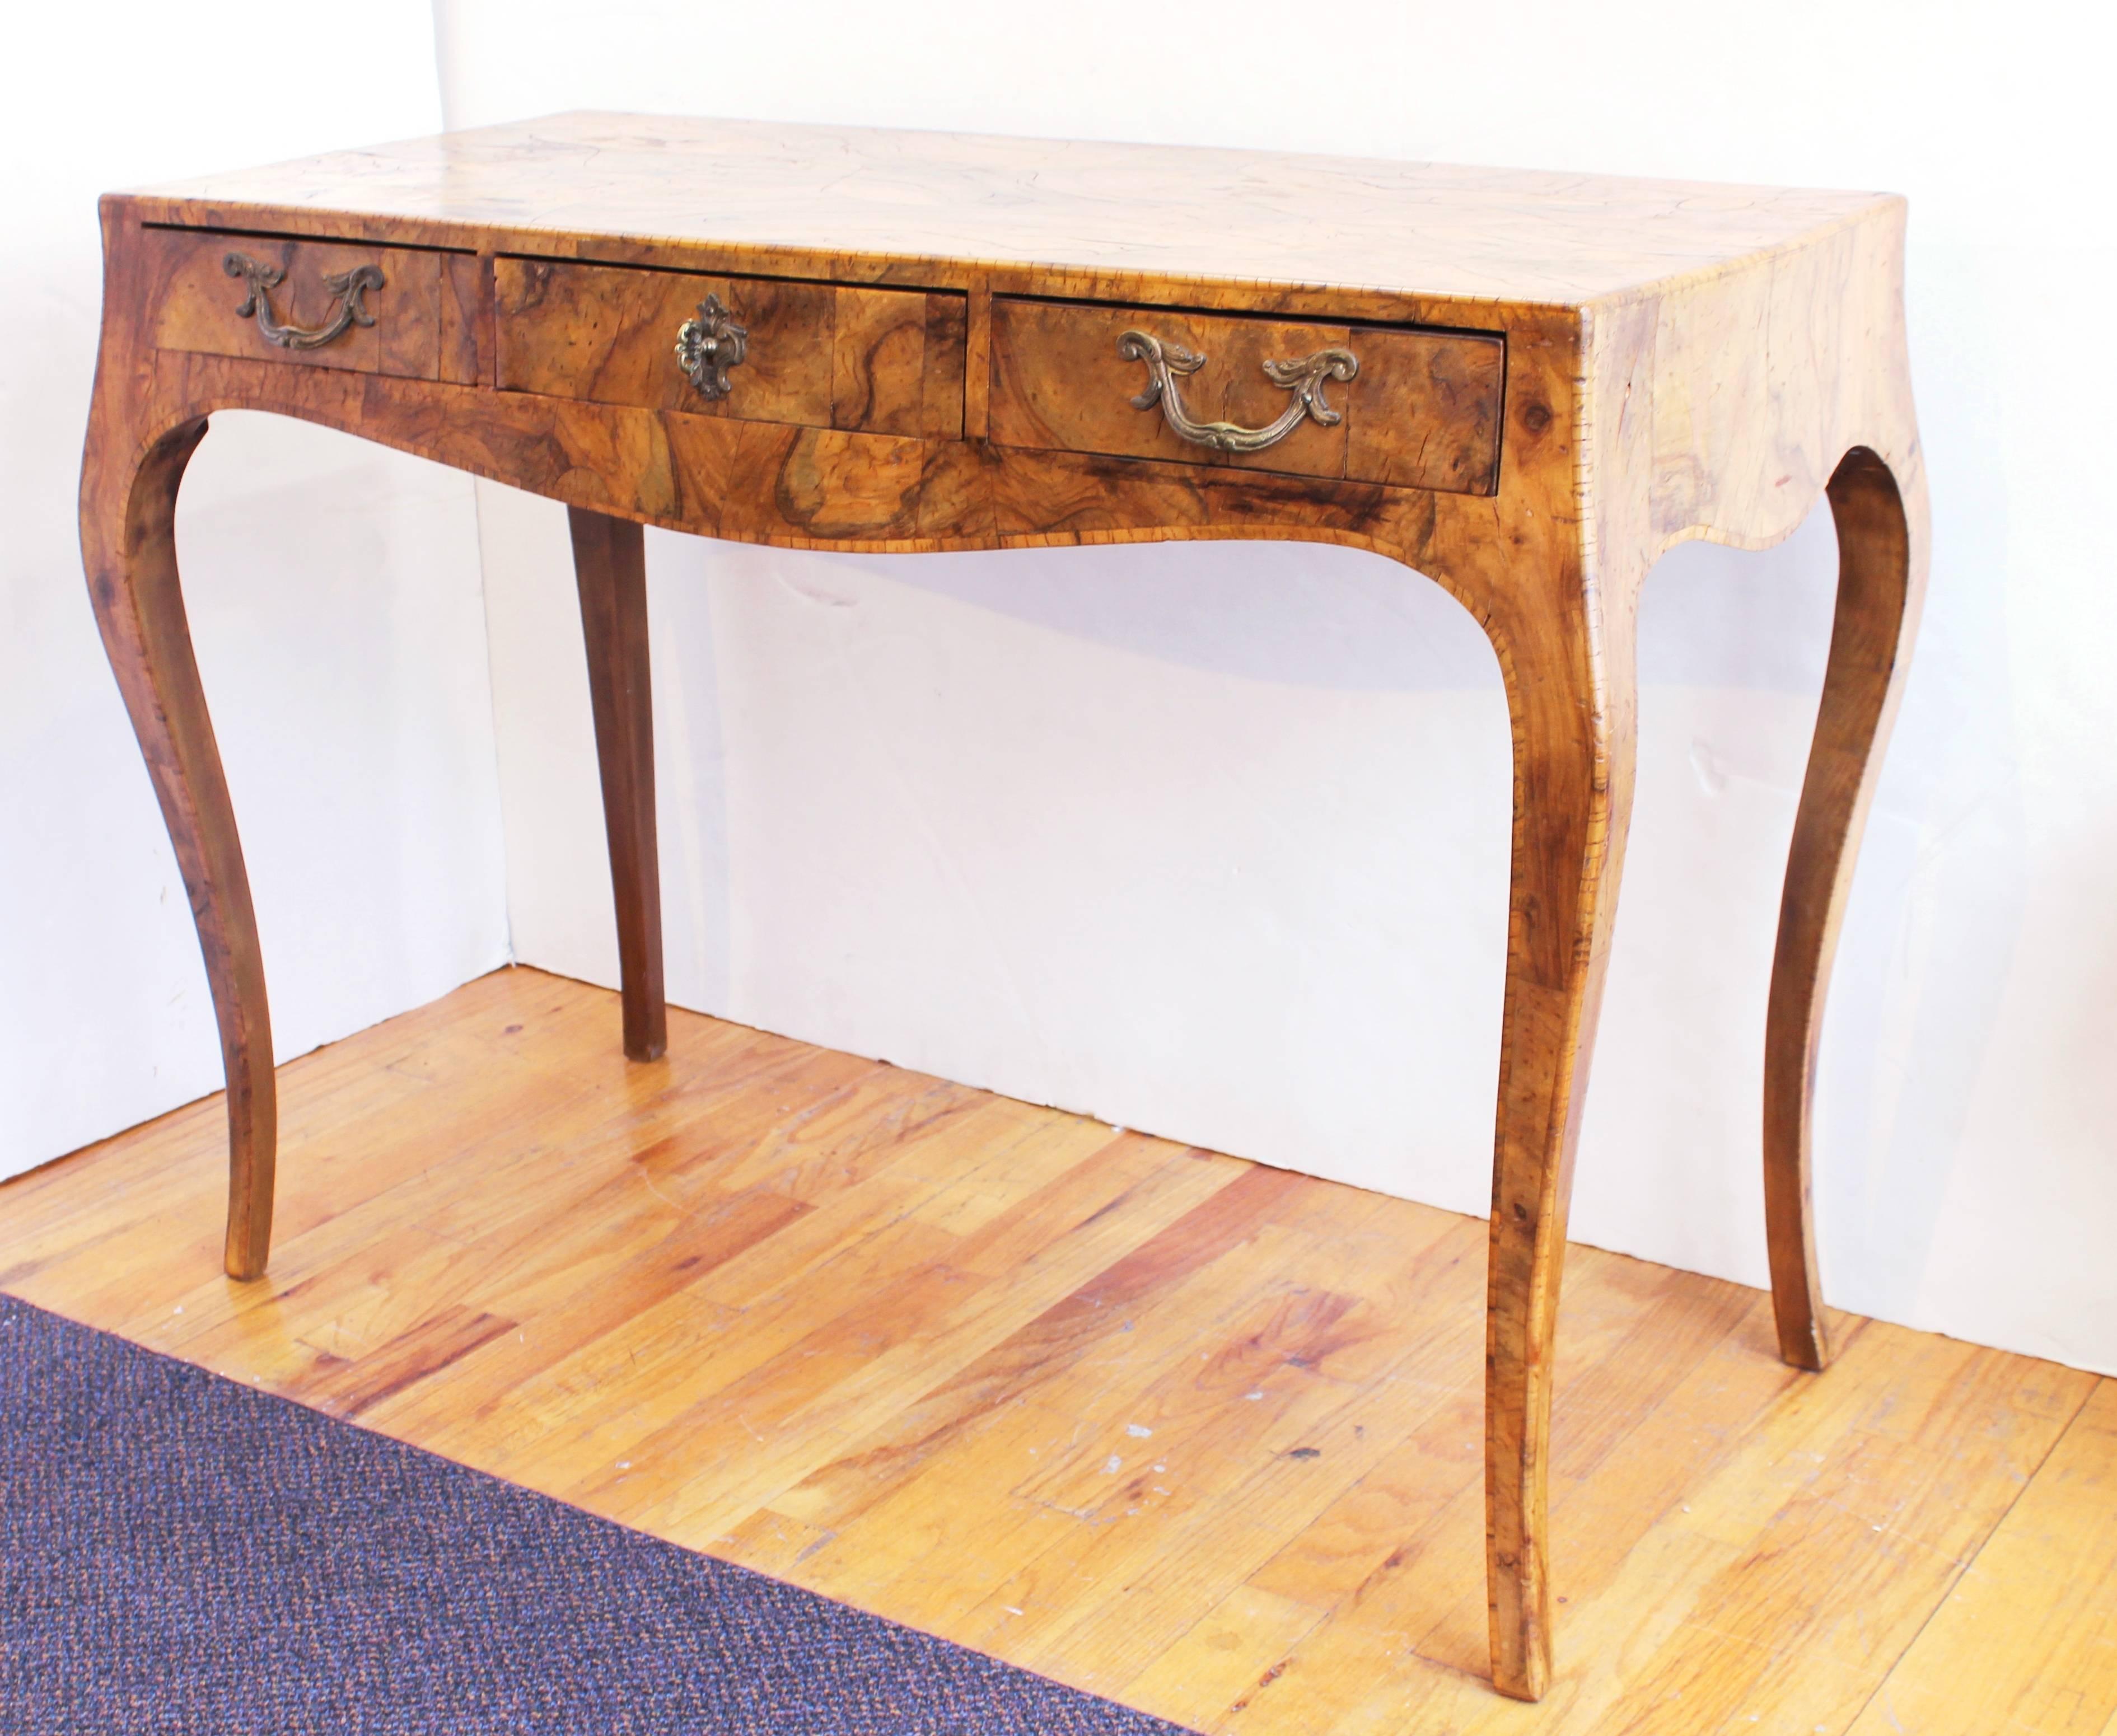 Italian Baroque style oyster burl wood console table with cabriole legs, bombe sides and three drawers. The piece has some natural cracking to the wood finishing and minor stress cracks but is in overall good vintage condition.